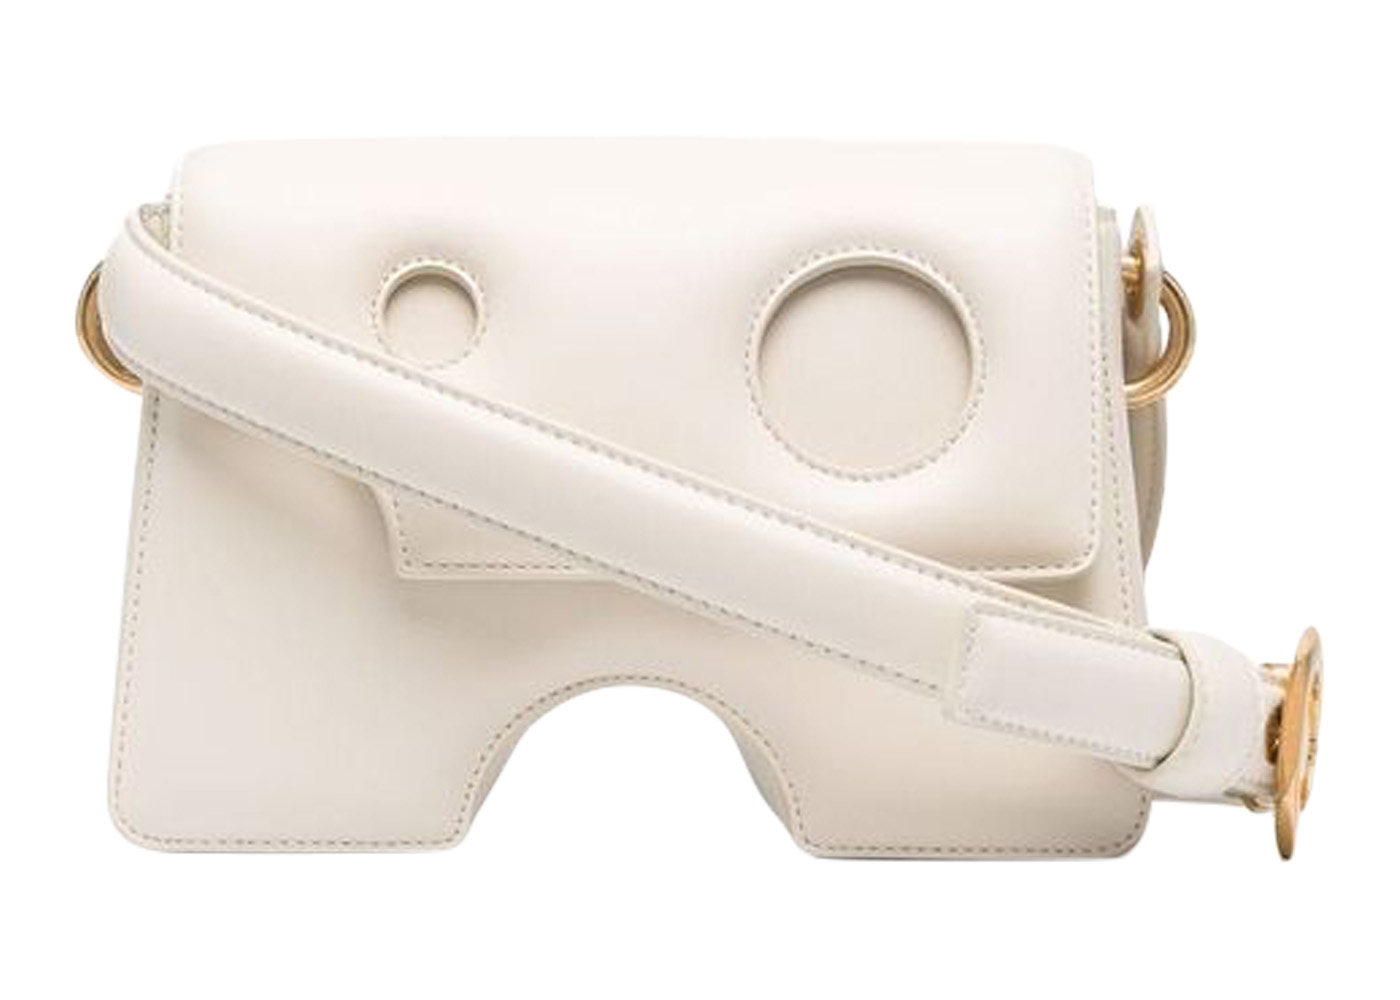 OFF-WHITE Burrow-22 Shoulder Bag Beige in Leather with Gold-tone - US